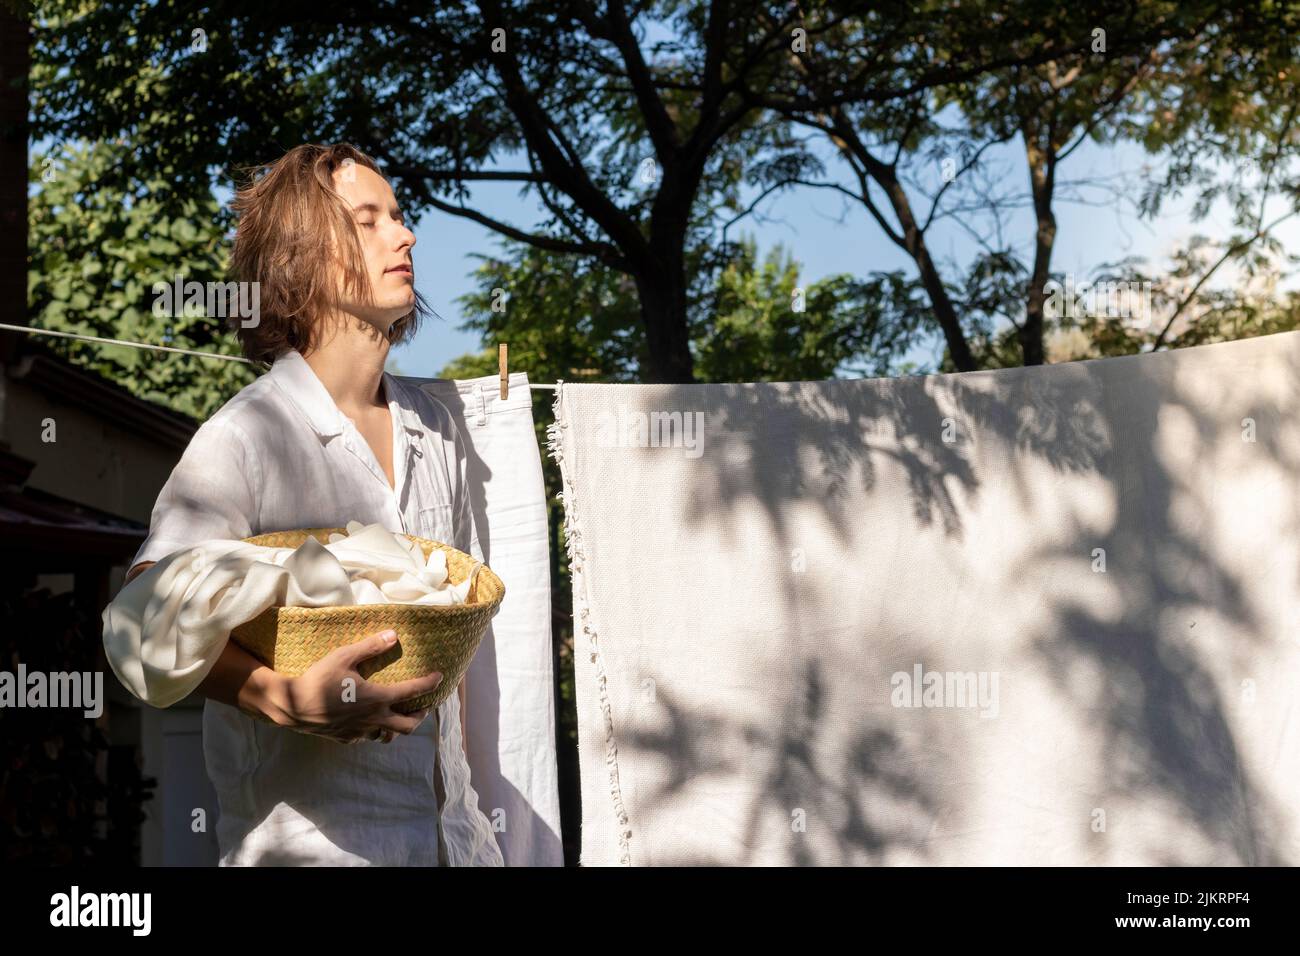 Young long hair man with closed eyes ejoying the summer sun on his face while hanging out the linen washing Stock Photo